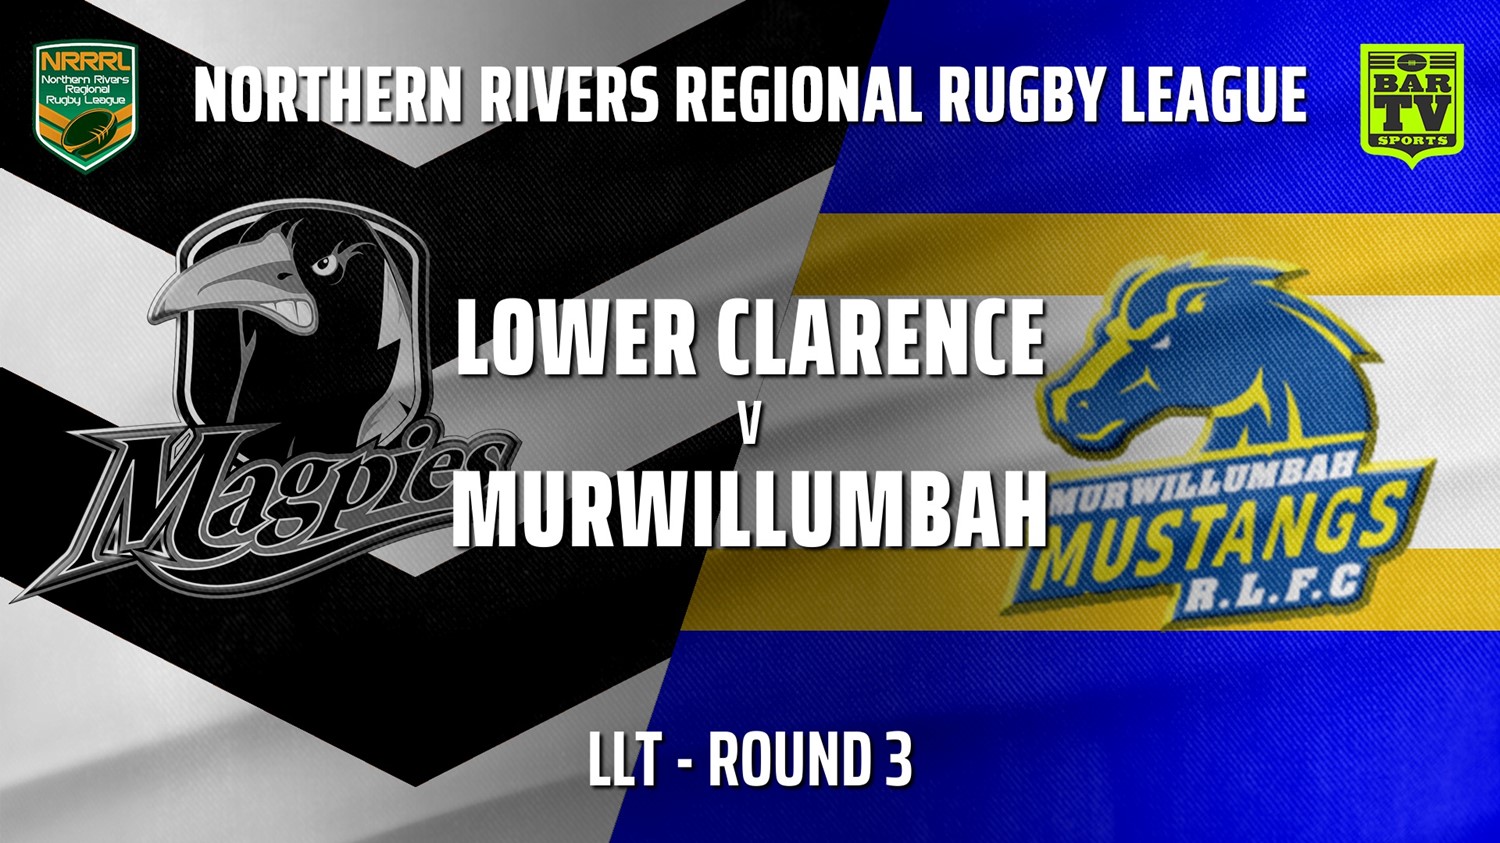 210516-NRRRL Round 3 - LLT - Lower Clarence Magpies v Murwillumbah Mustangs Slate Image